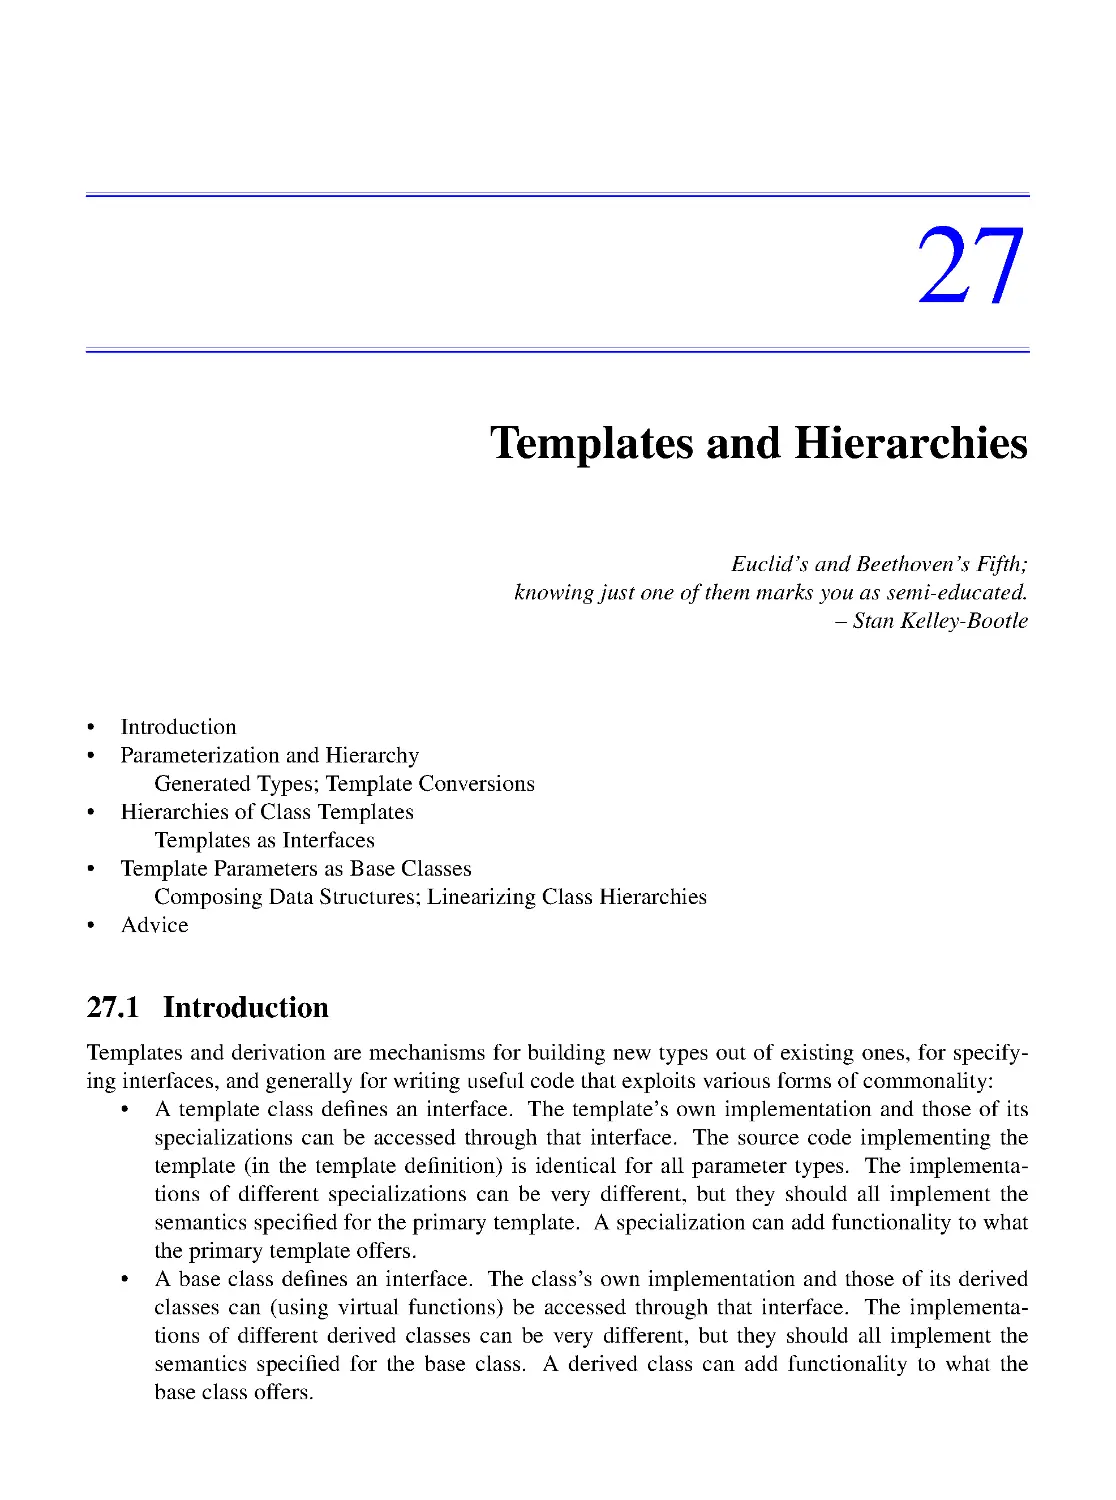 27. Templates and Hierarchies